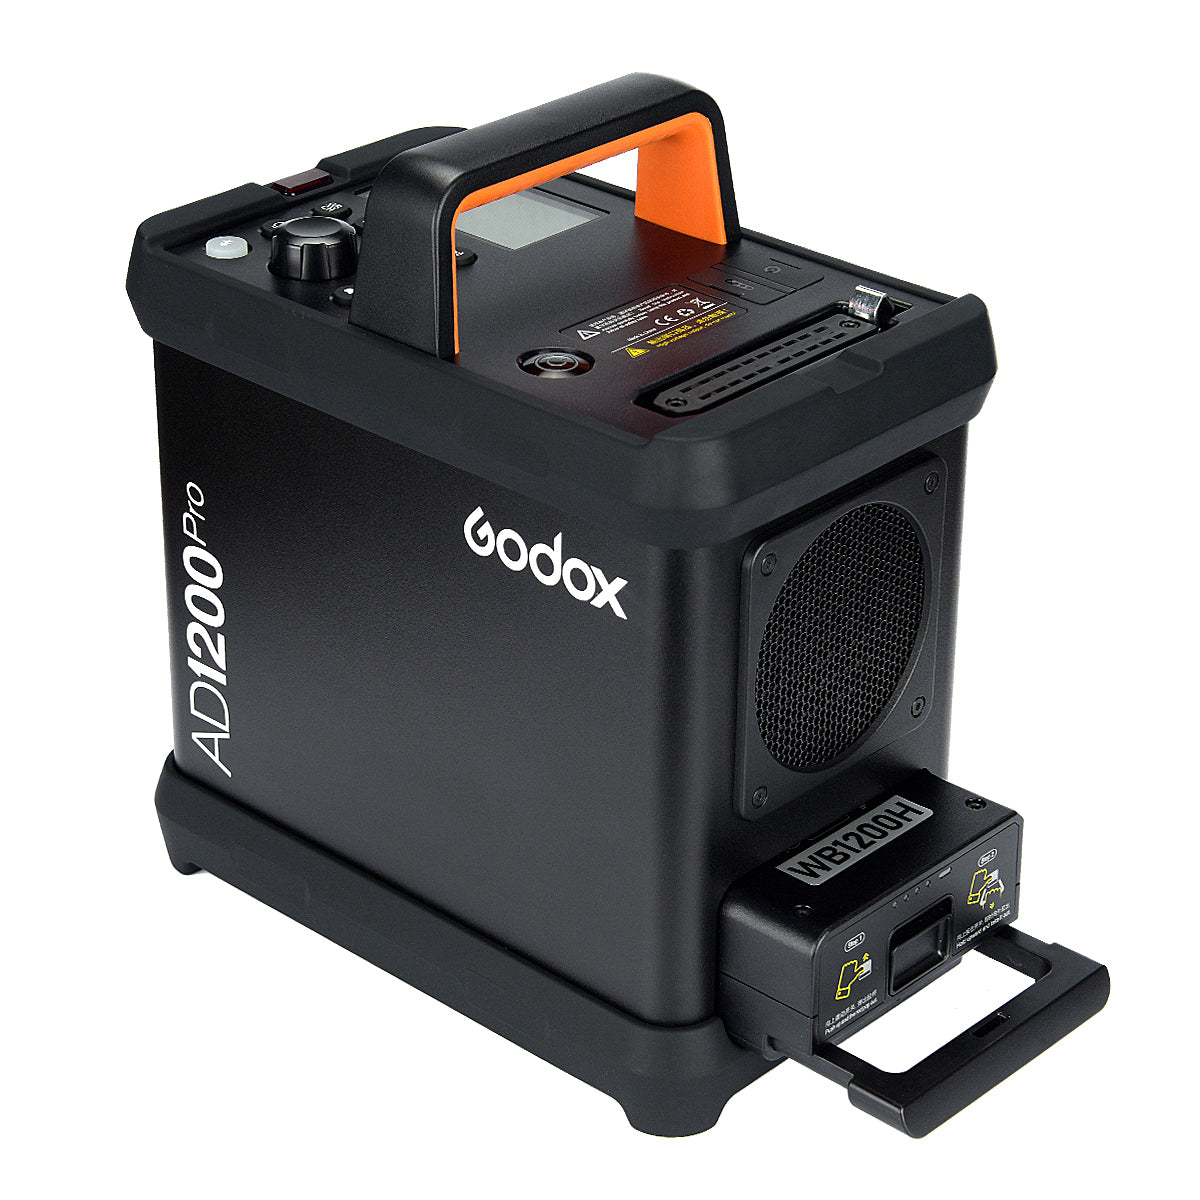  Godox AD300Pro Outdoor Strobe Flash Light, 2.4G Wireless 300Ws  TTL 1/8000s 320 Times Full Power Flash Rechargeable Battery Compatible with  Canon Nikon Sony FUJIFILM Panasonic Pentax Olympus : Electronics